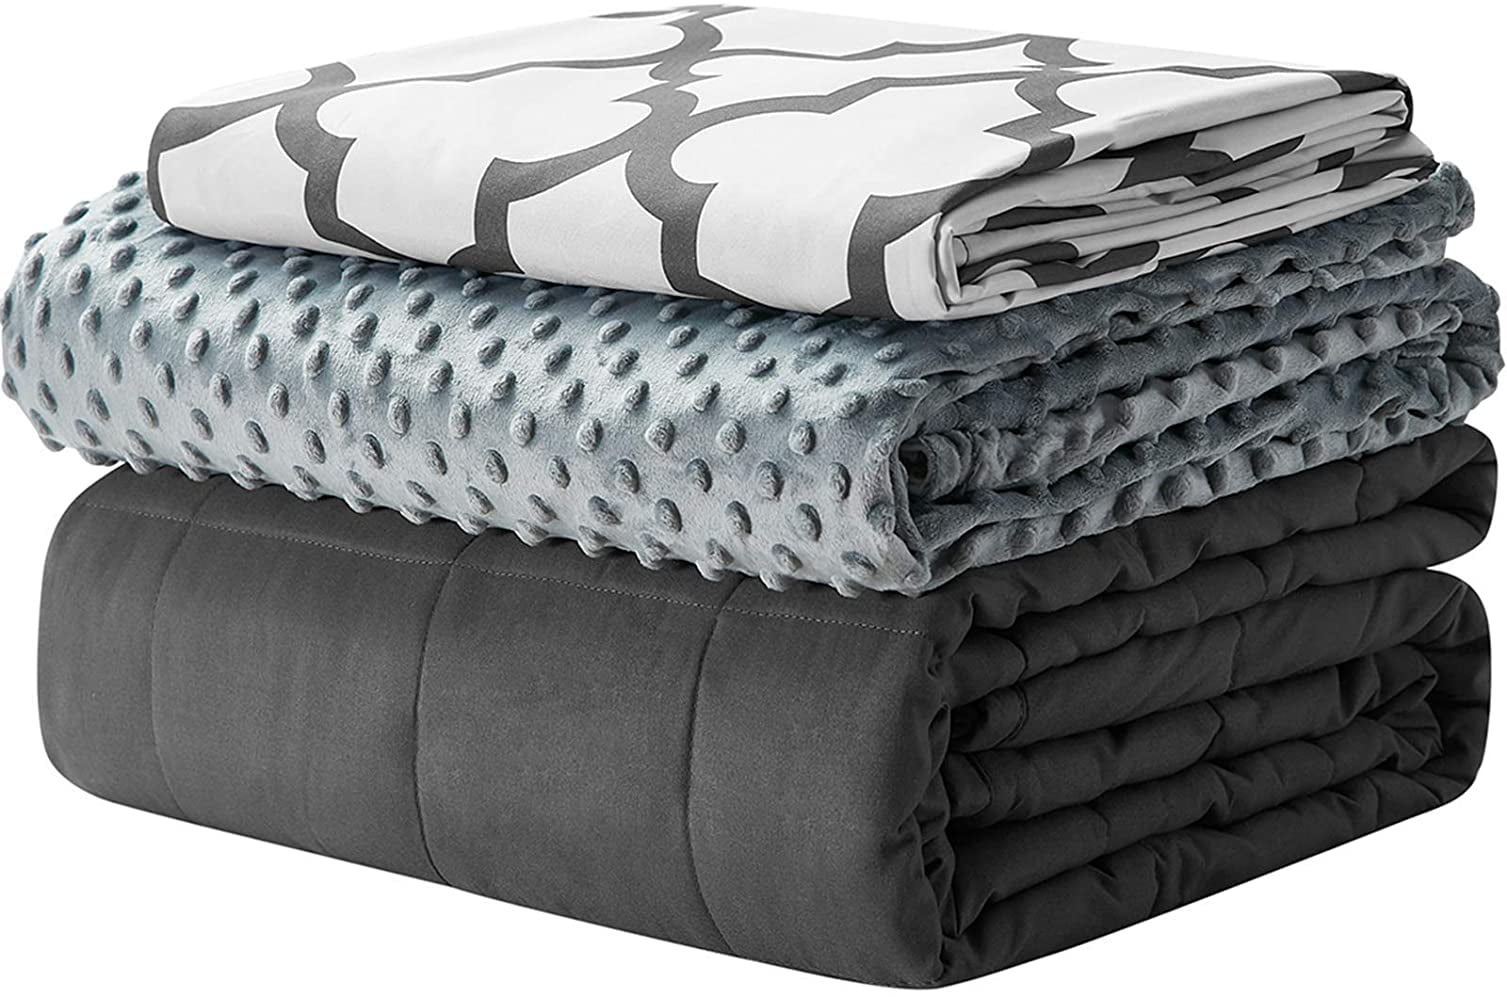 YnM Weighted Blanket and Duvet Covers — Hot and Cold Duvet Cover Set (3